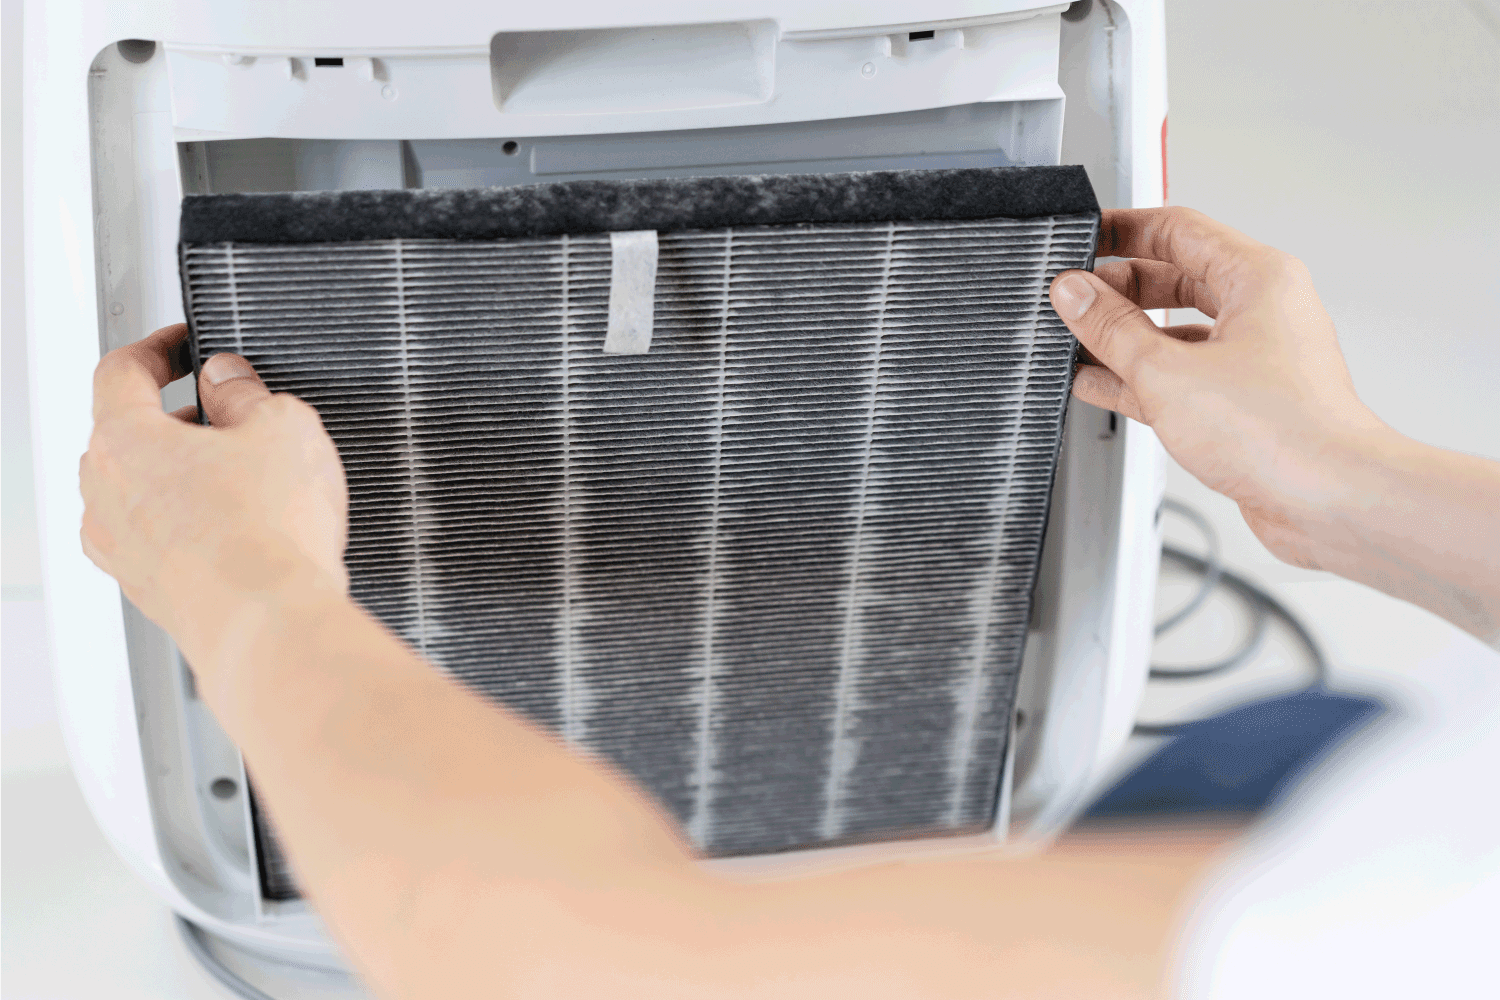 woman changing the dirty air purifier filter after using for a long time in the dirty air environment